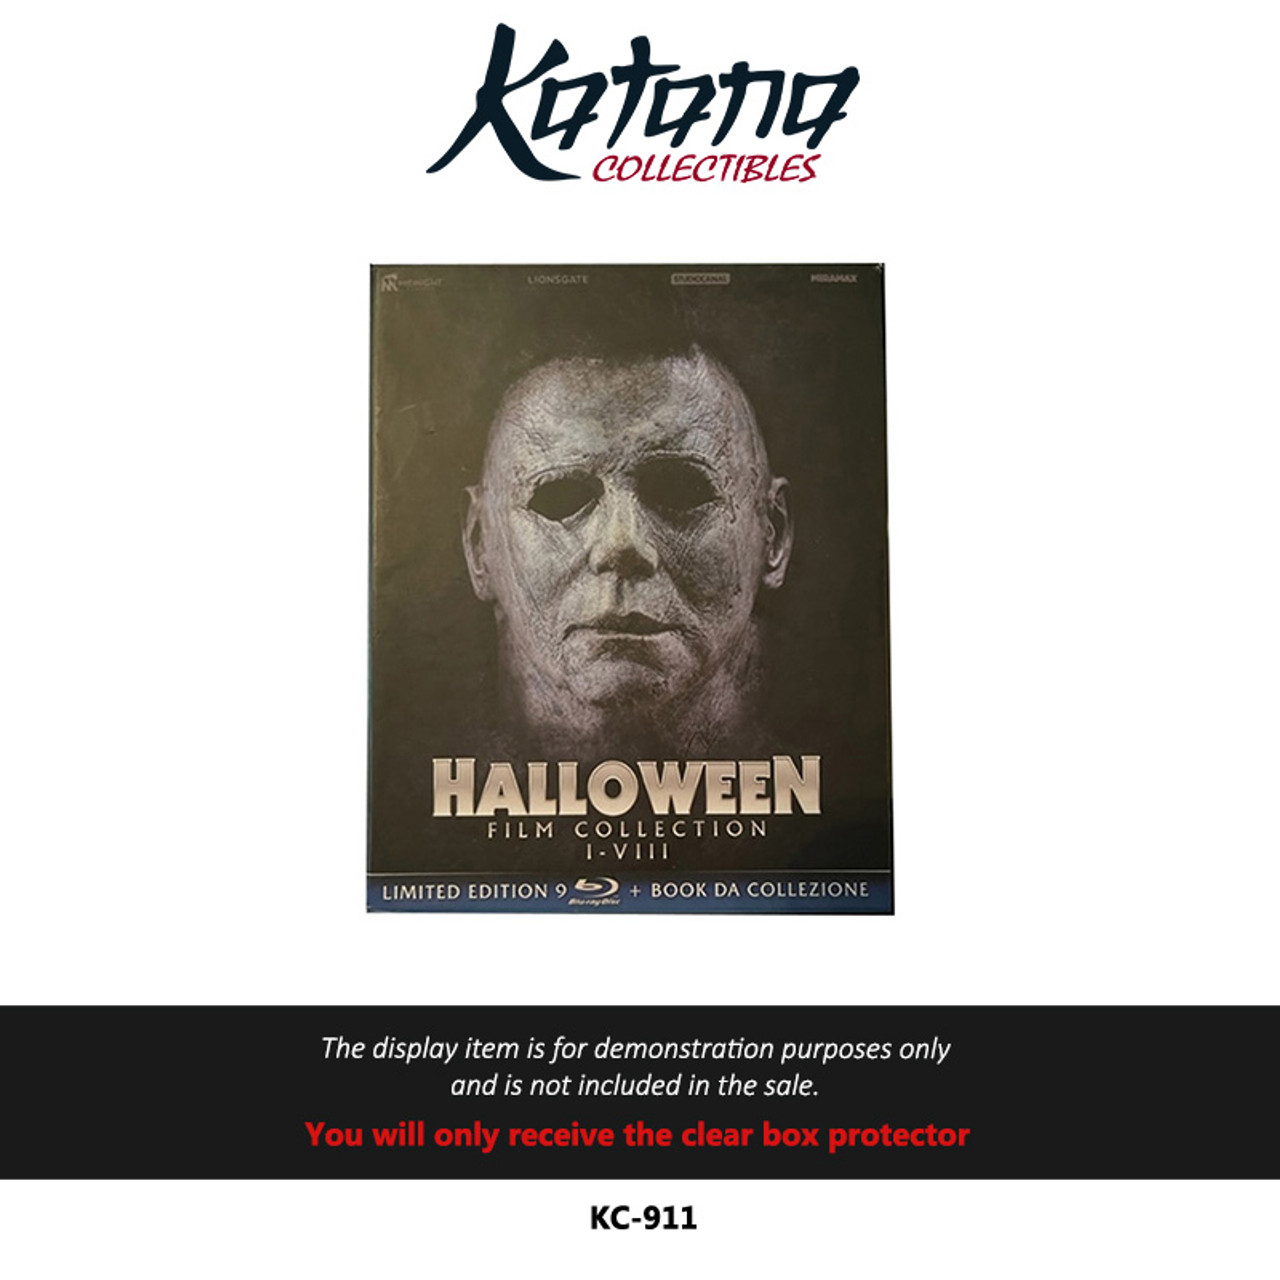 Katana Collectibles Protector For Halloween The Collection 1-8 Italian Limited Edition Blu-ray Box Set